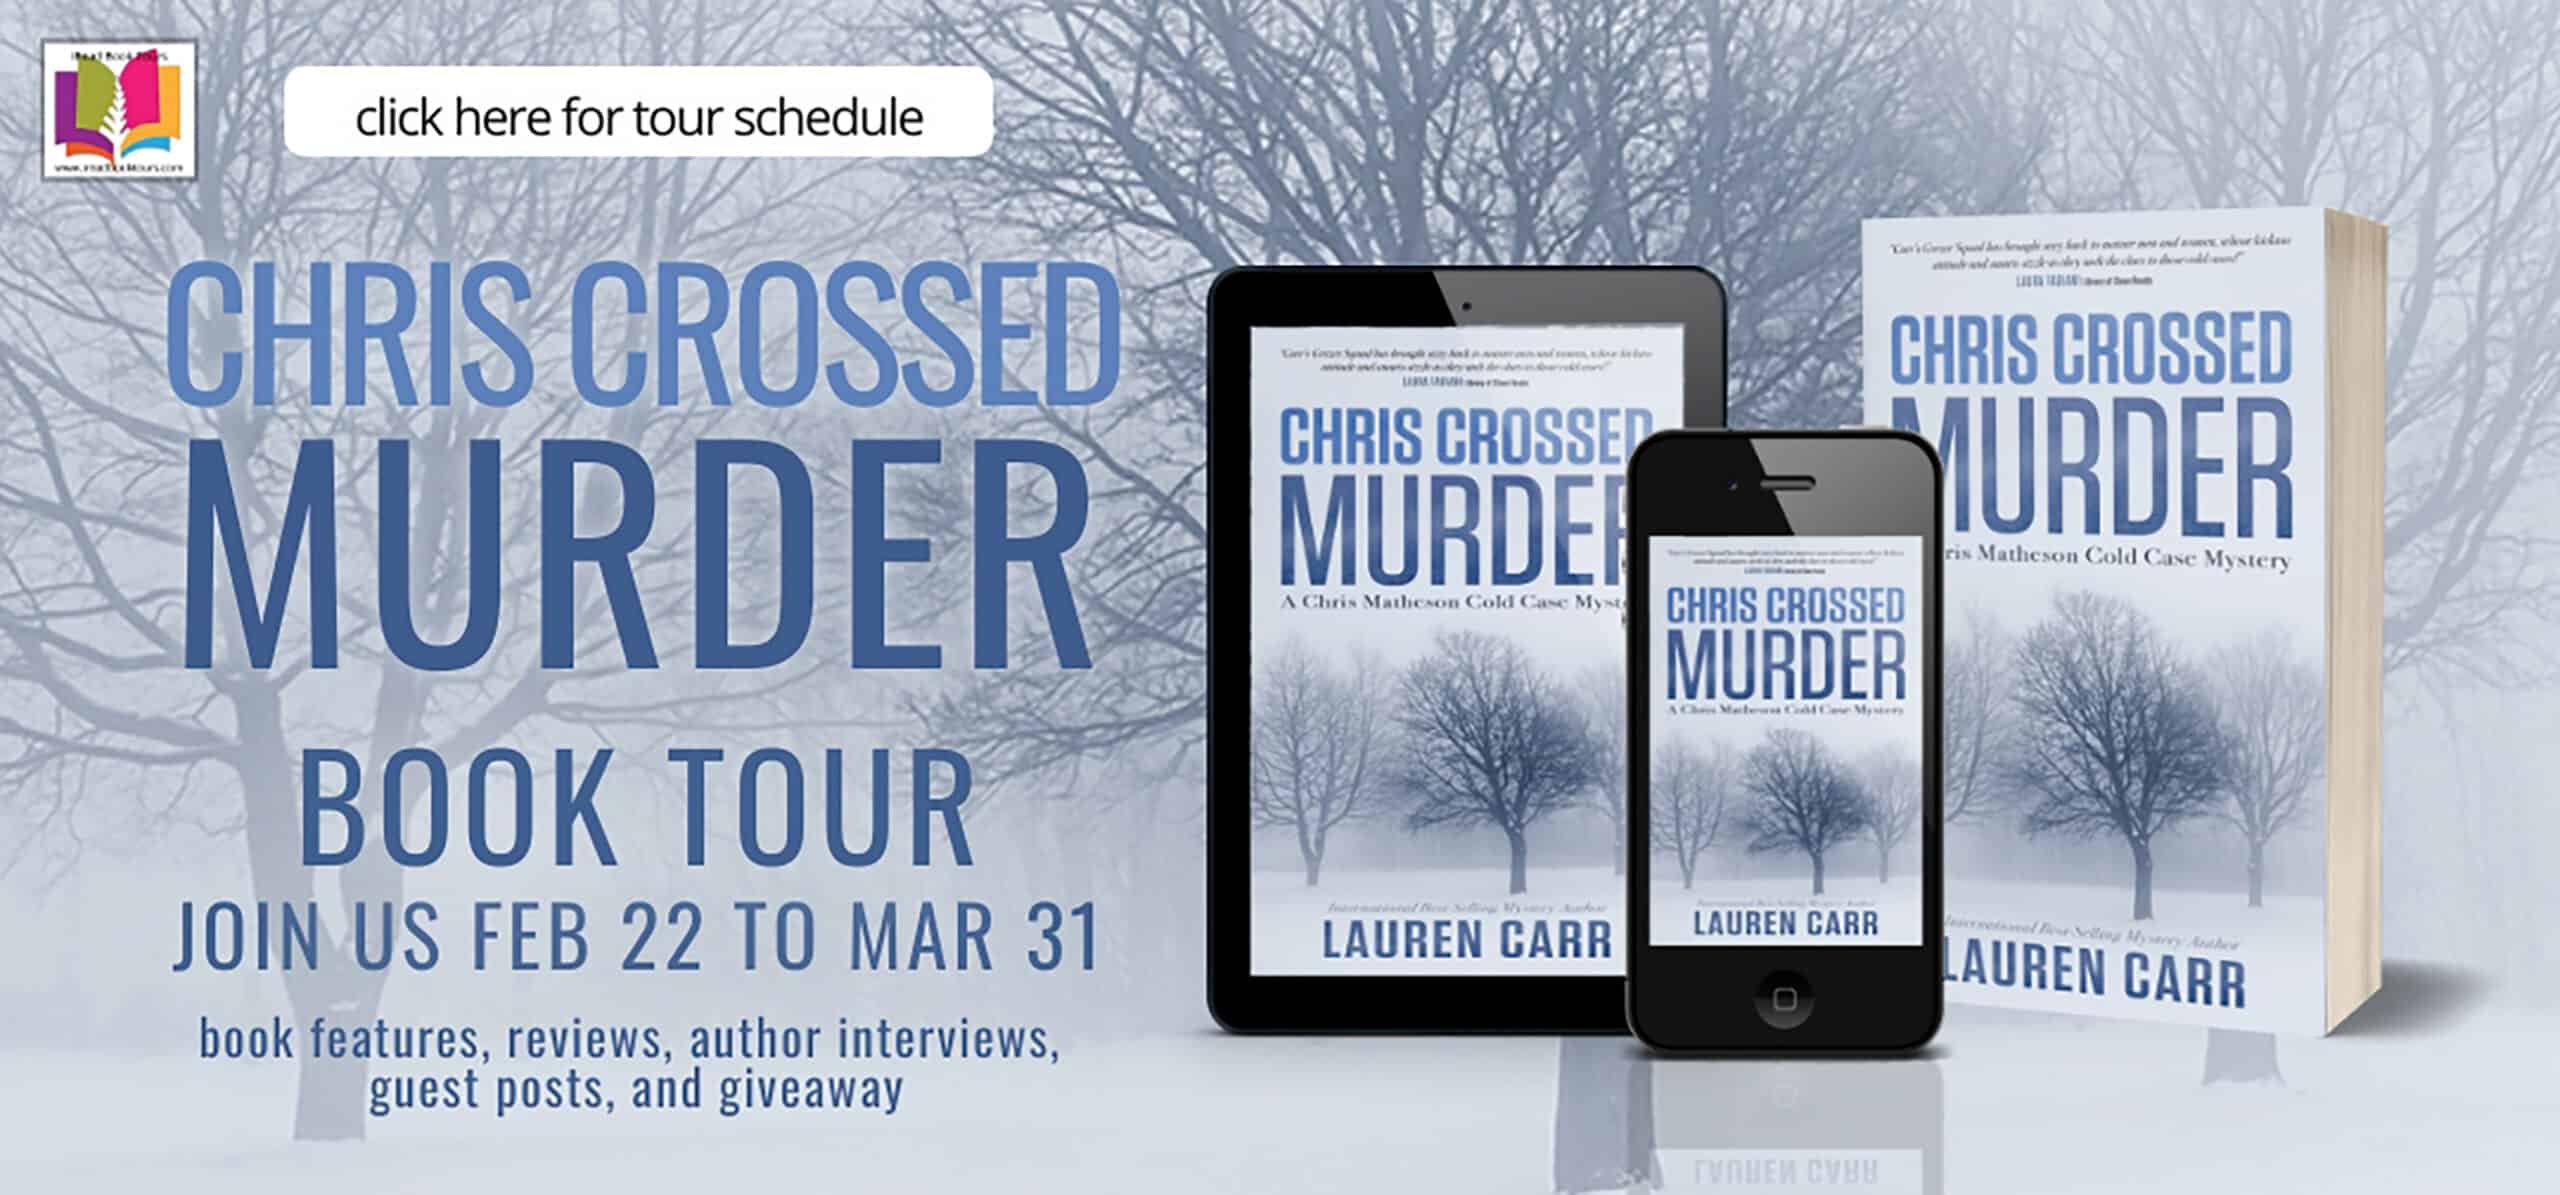 Chris Crossed Murder (A Chris Matheson Cold Case Mystery #4) by Lauren Carr | Book Review ~ Fabulous Giveaway | #PrivateInvestigator #TheGeezerSquad #Mystery